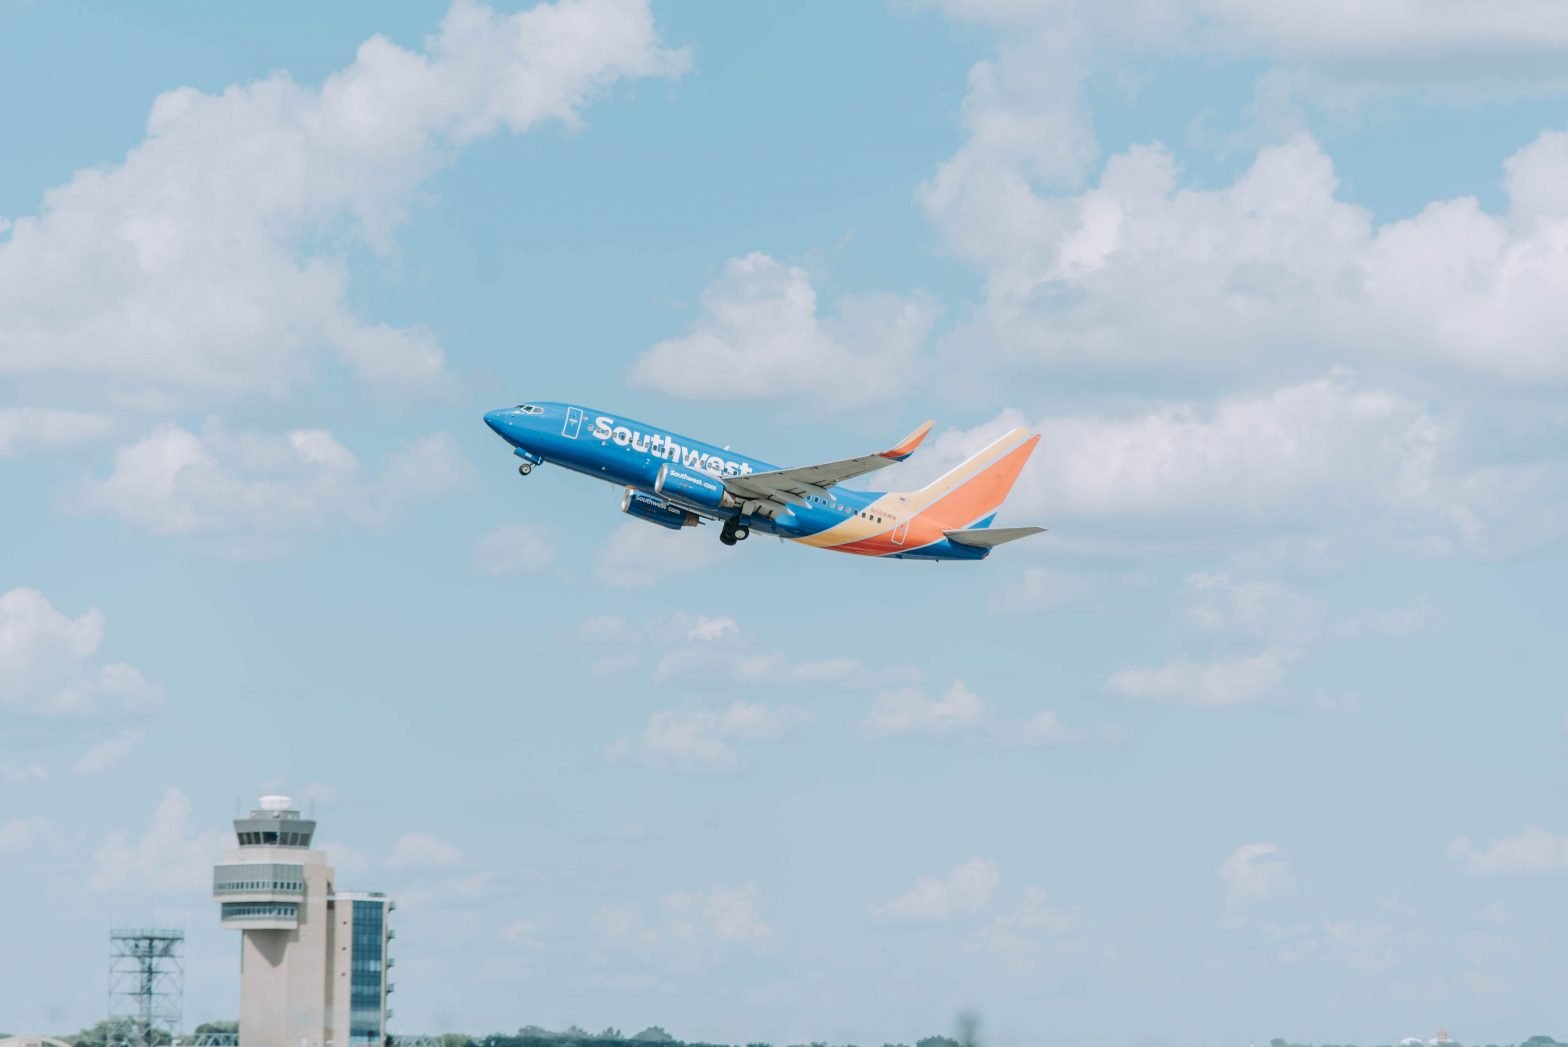 southwest airplane taking off